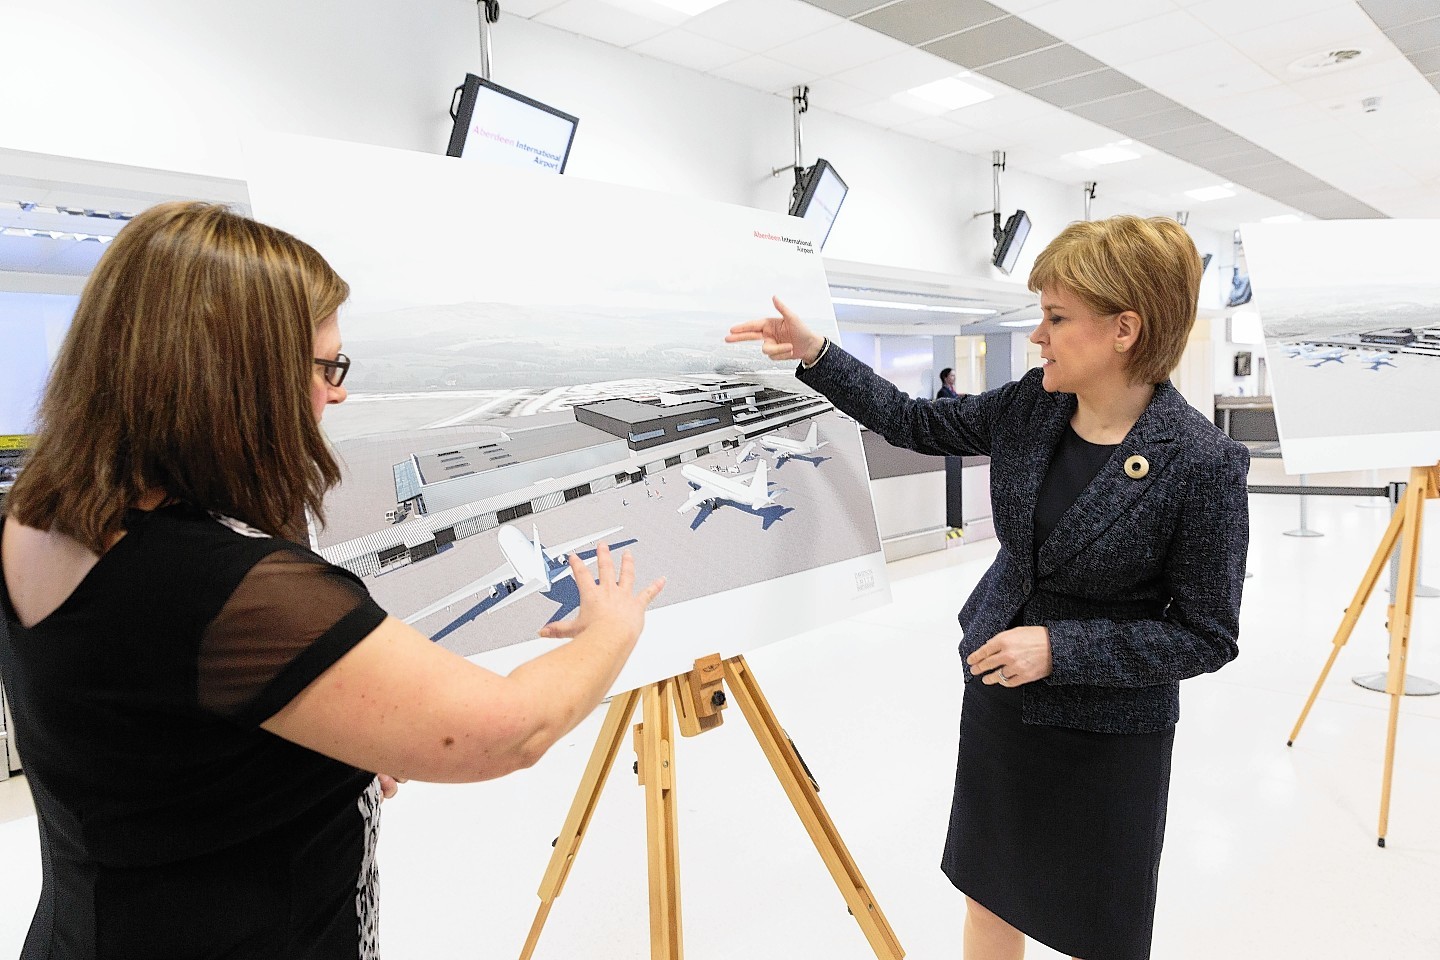 Nicola Sturgeon discusses the proposals with Carol Benzies, managing director of the airport